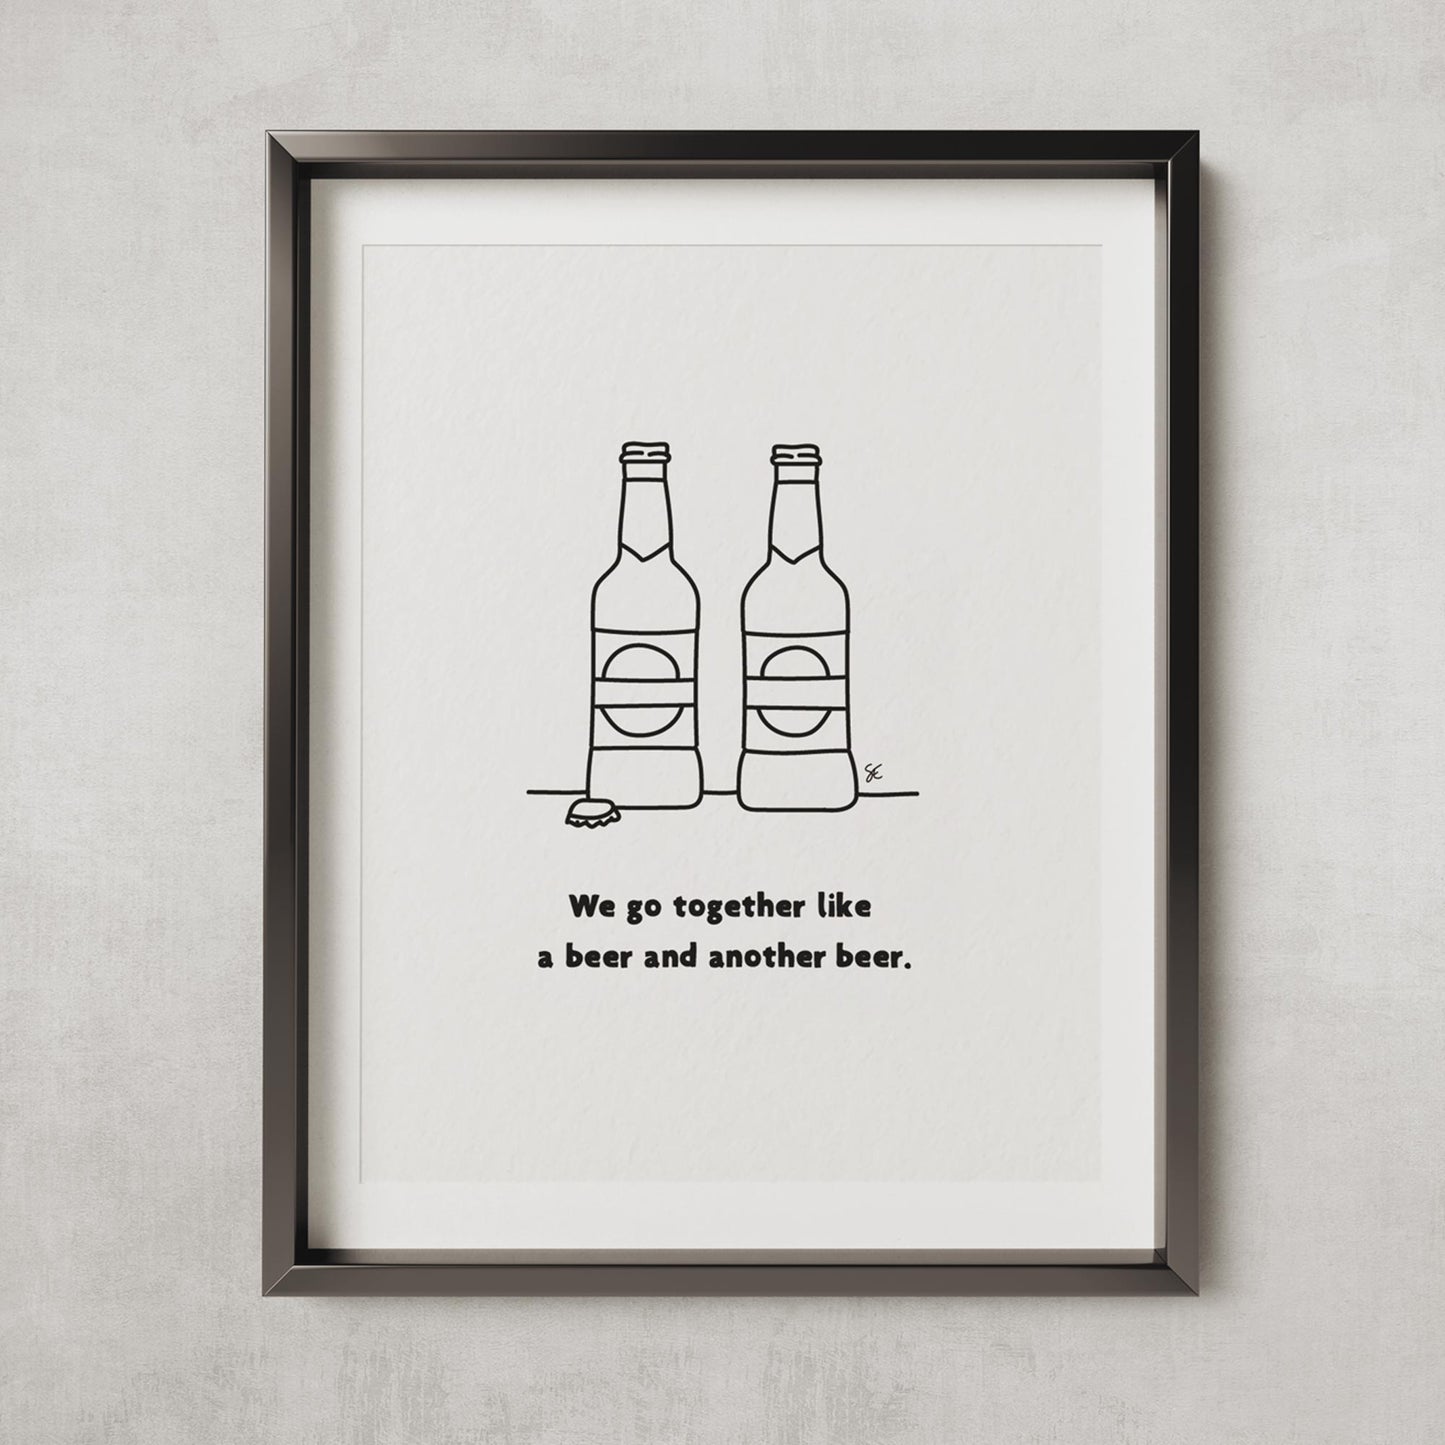 We Go Together Like Beer & Beer - Beer Lovers Print Gift A3 Size